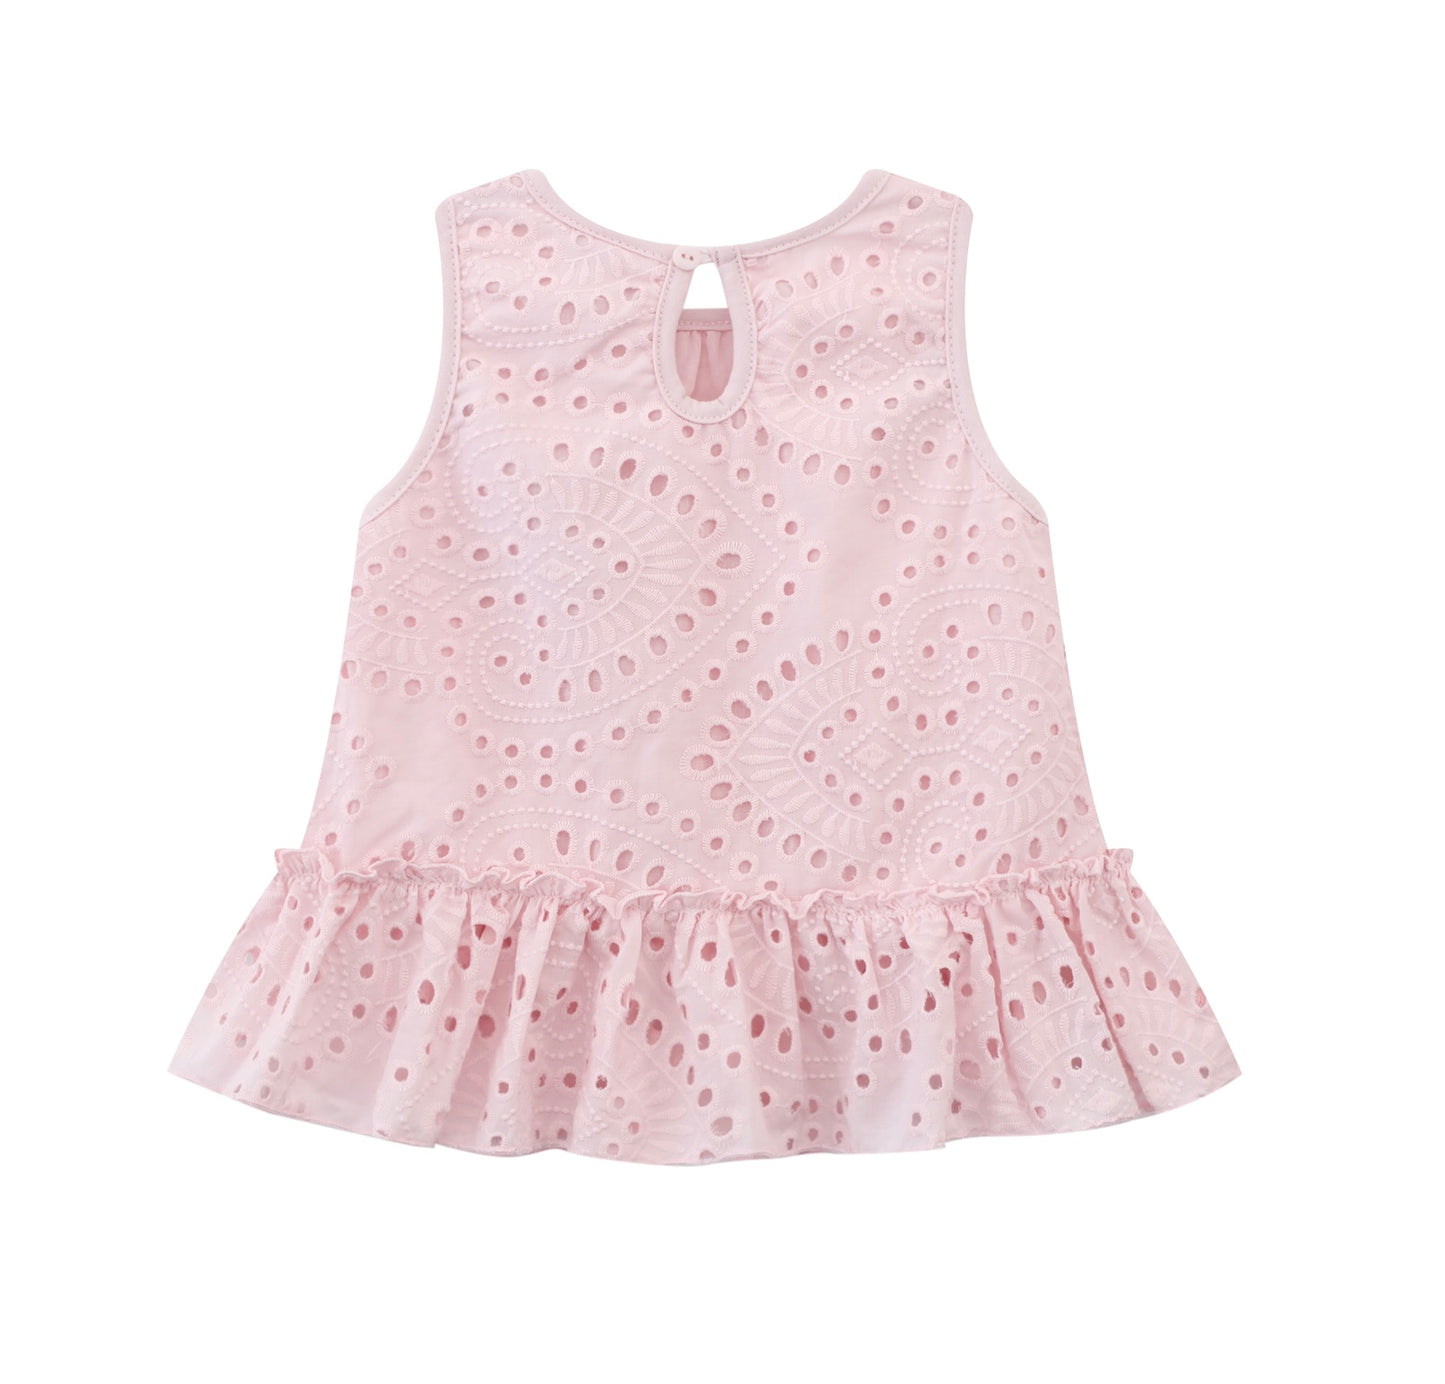 Cove top - Pink